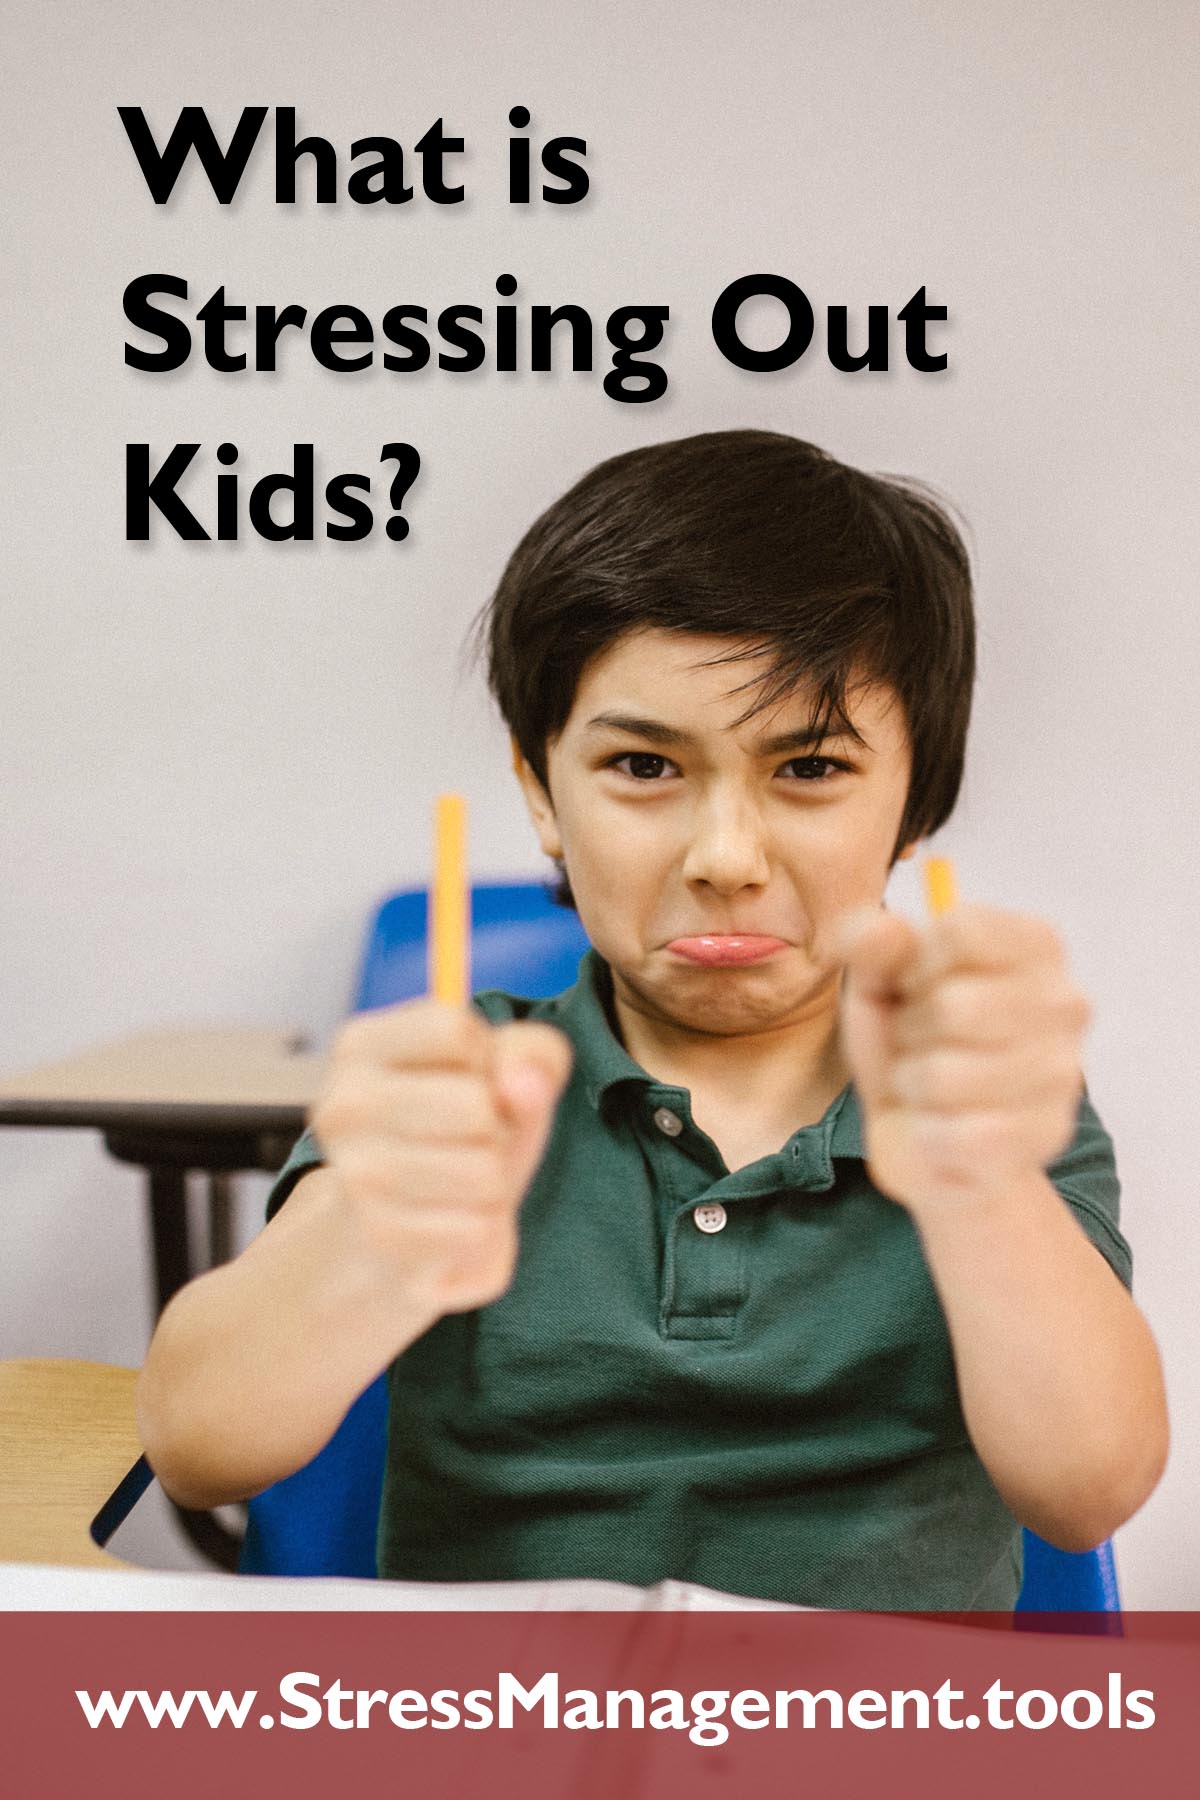 What is Stressing Out Kids?